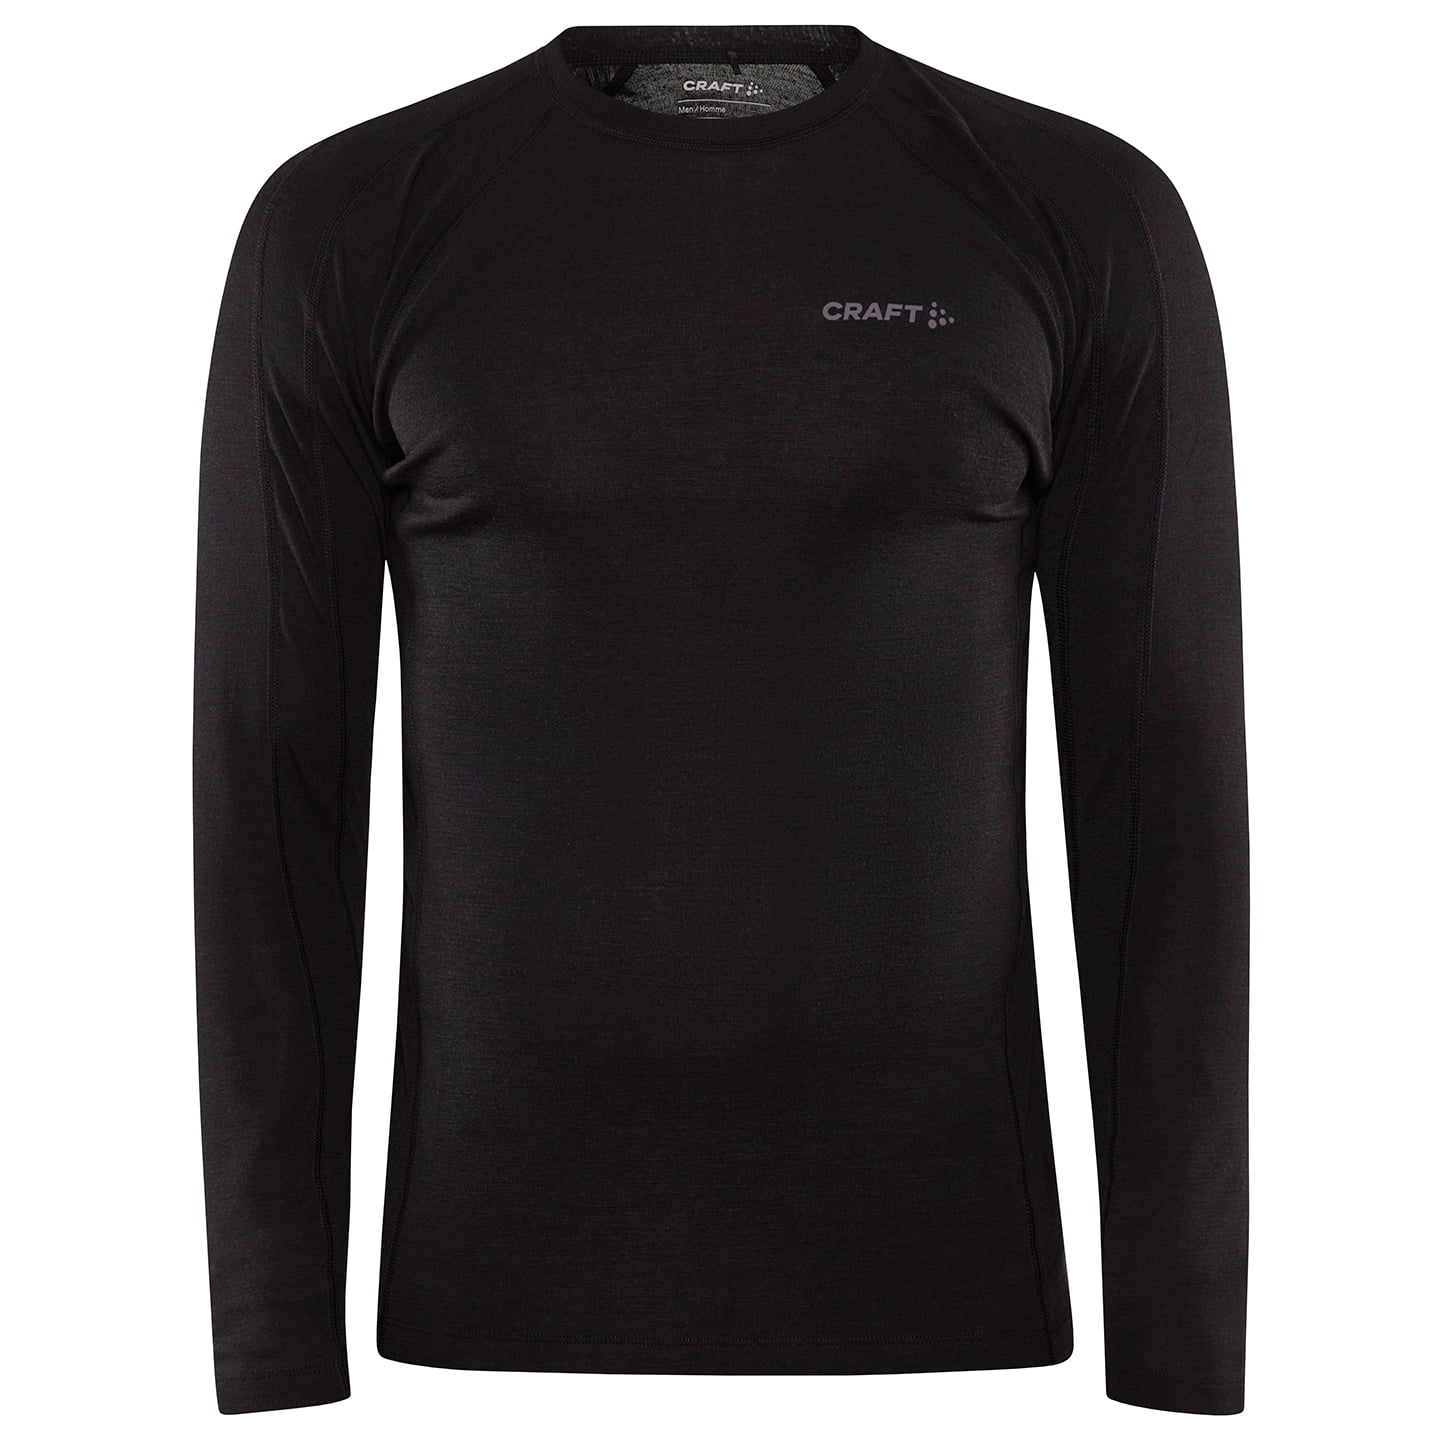 CRAFT Long Sleeve Cycling ADV Wool Merino Base Layer, for men, size L